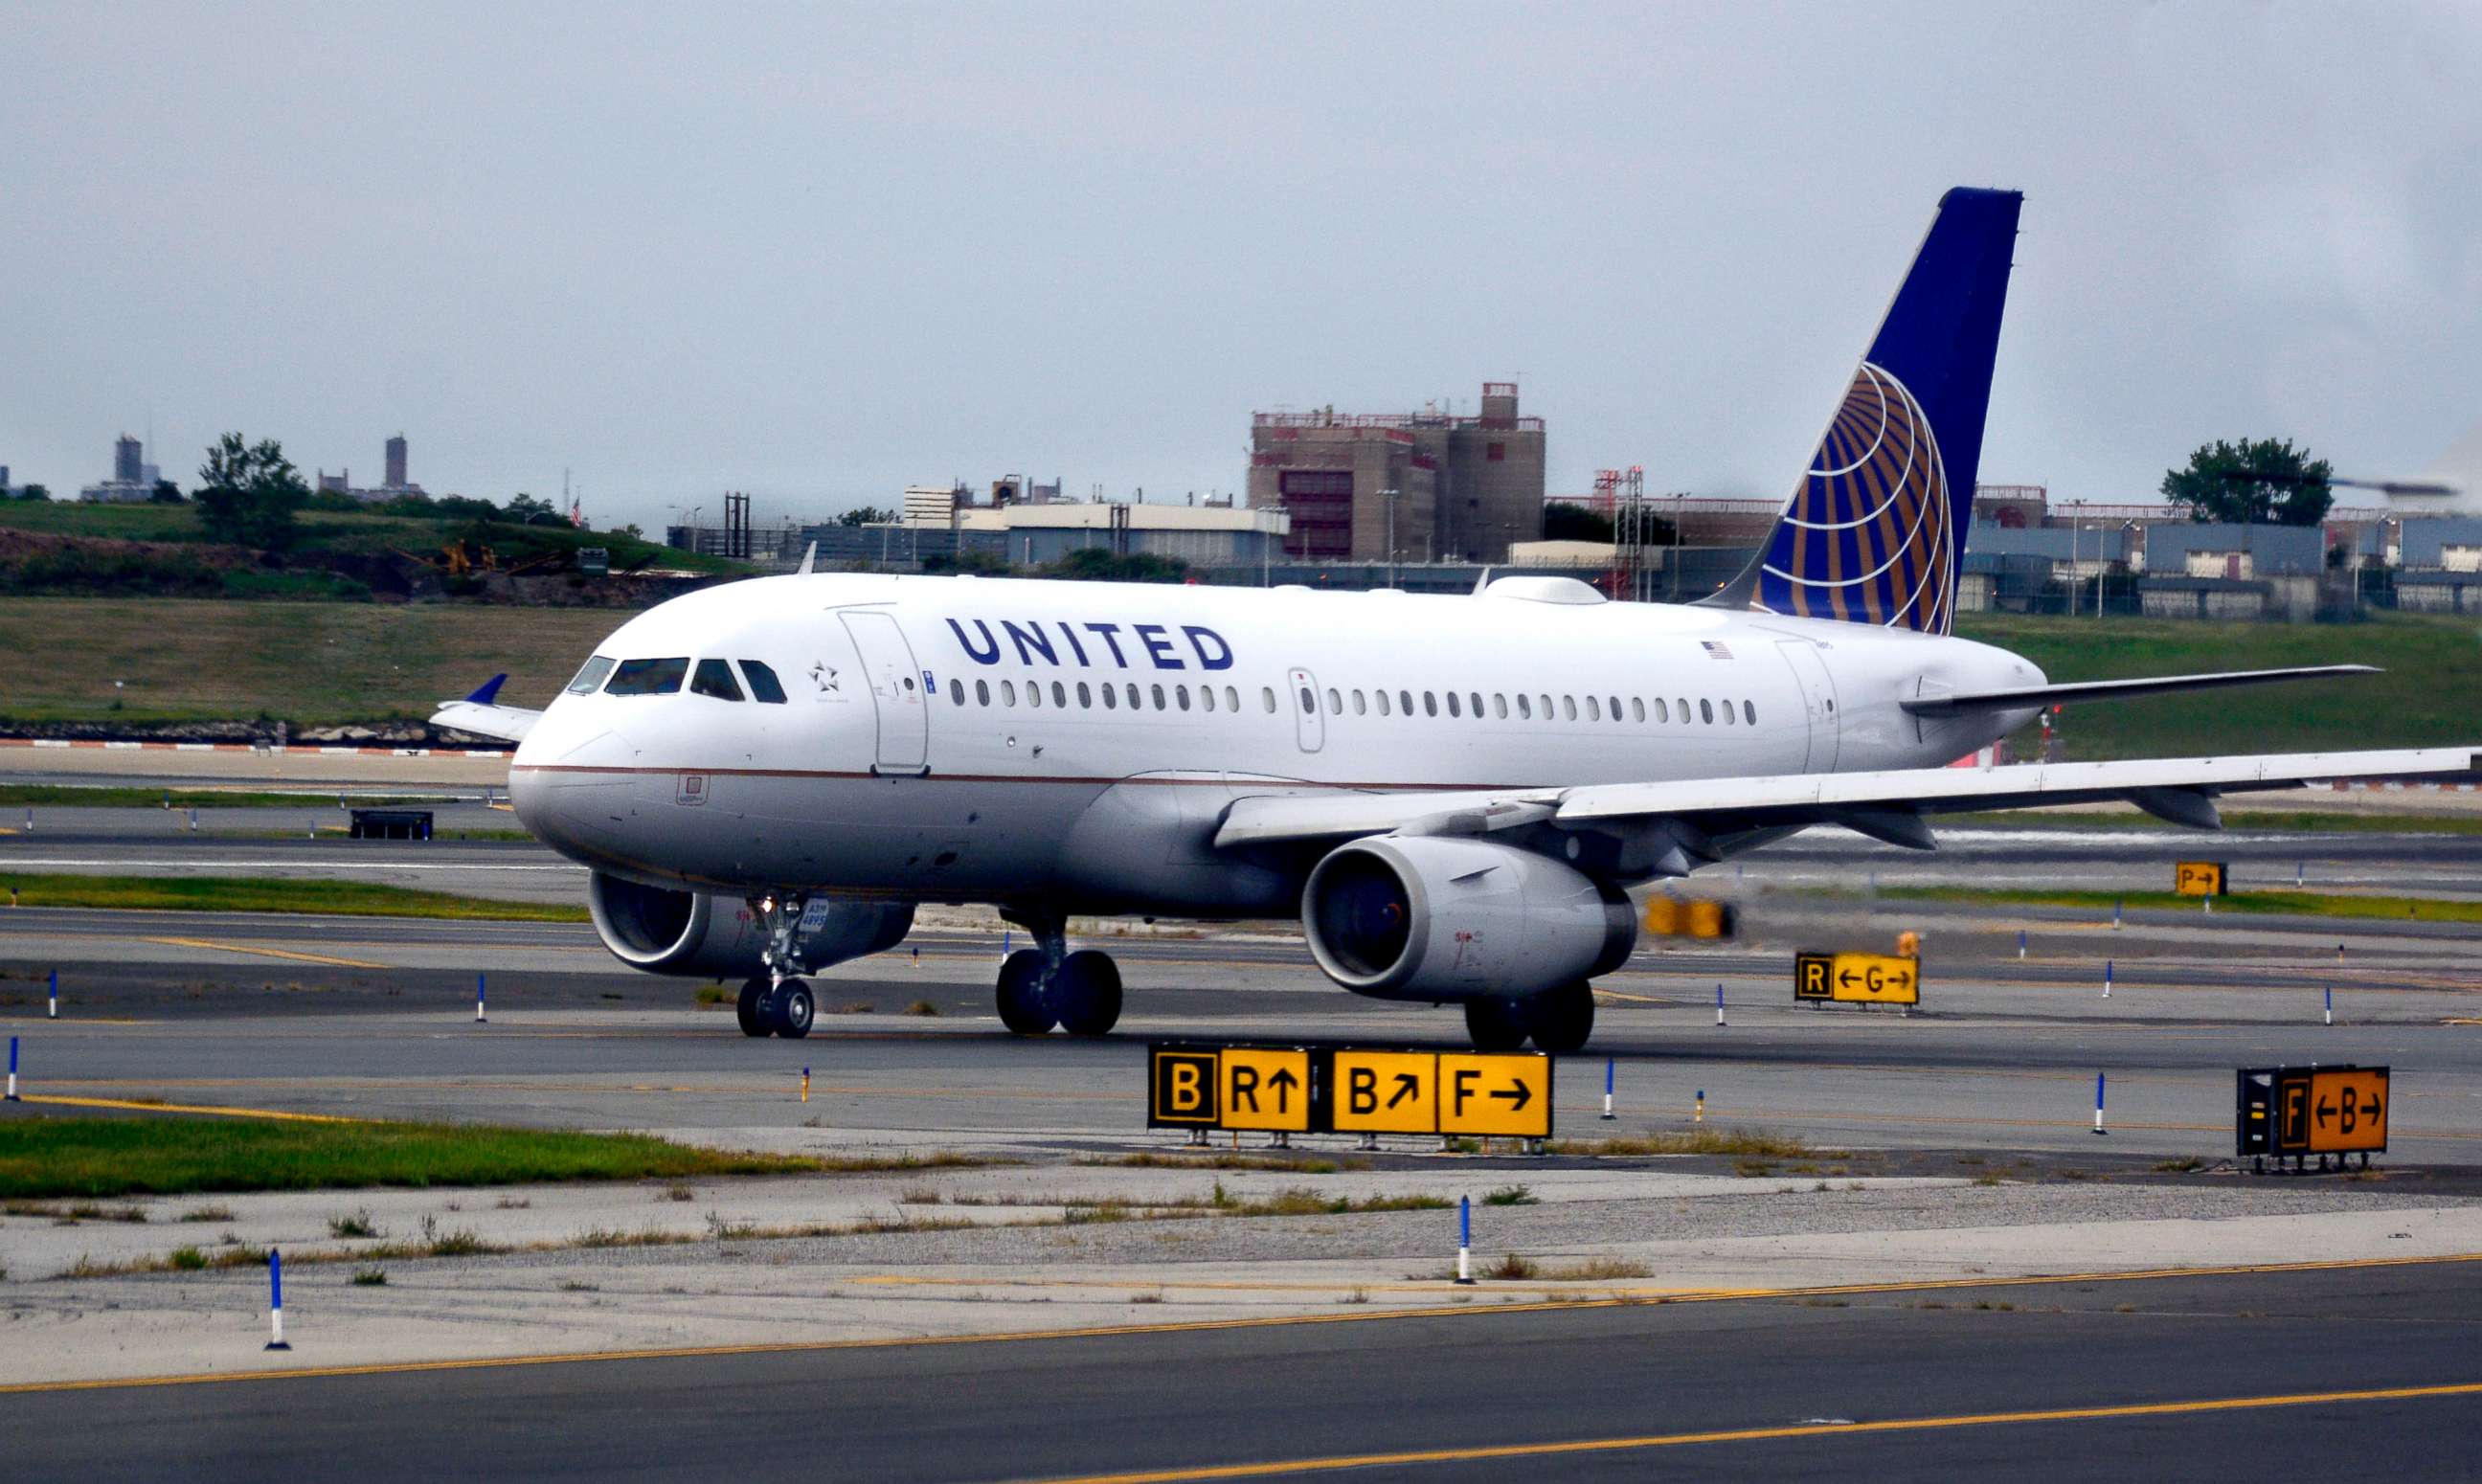 PHOTO: A United Airlines Airbus passenger jet taxis at LaGuardia Airport in New York, in this Sept. 21, 2017 file photo.